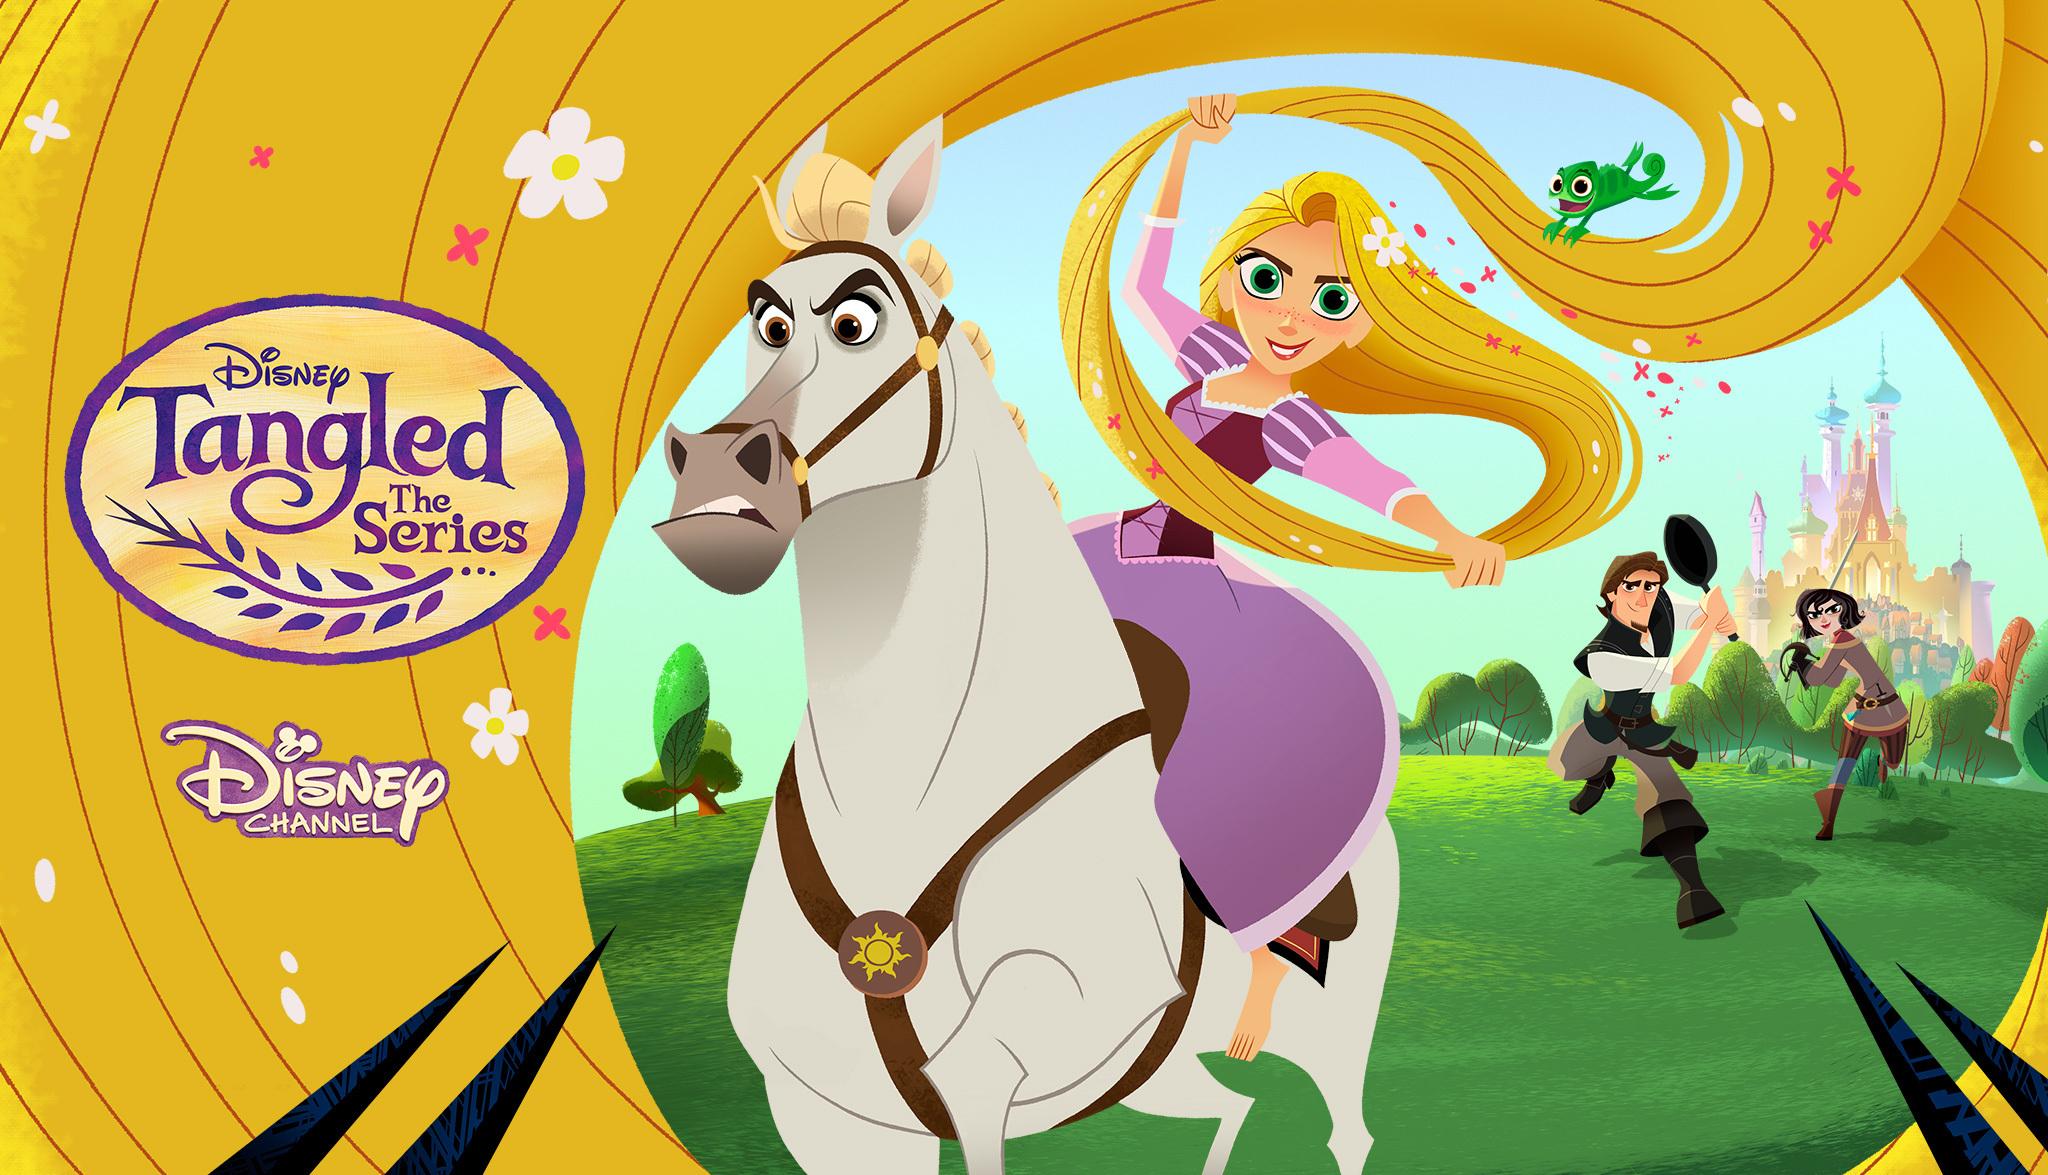 Tangled': A Story Whose Legacy Took Six Years to Shine